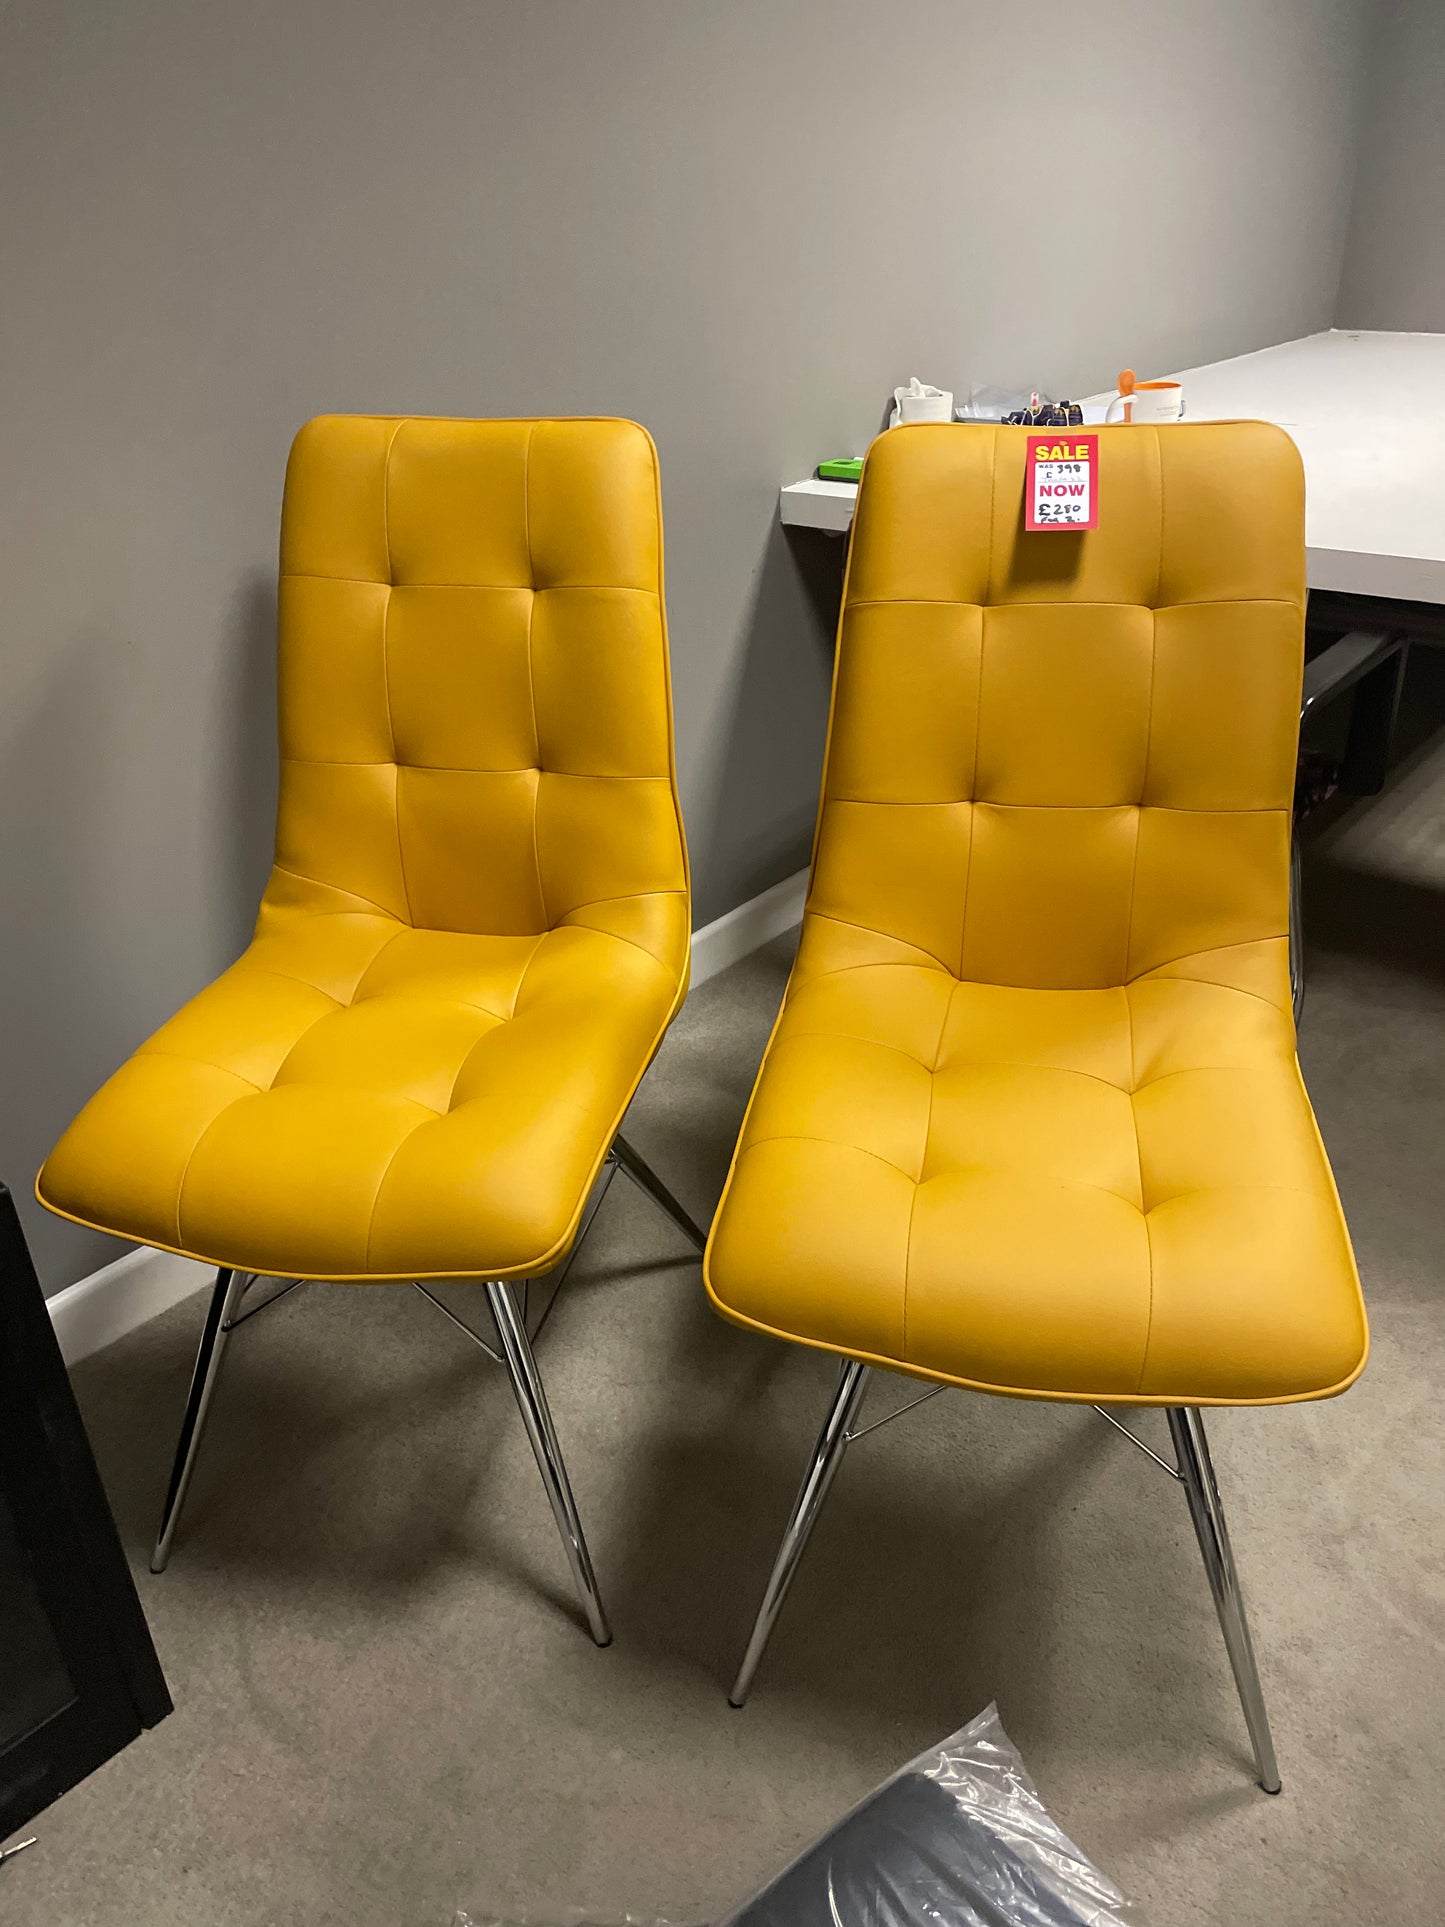 Tampa set of  4 contemporary ochre dining chairs  for collection